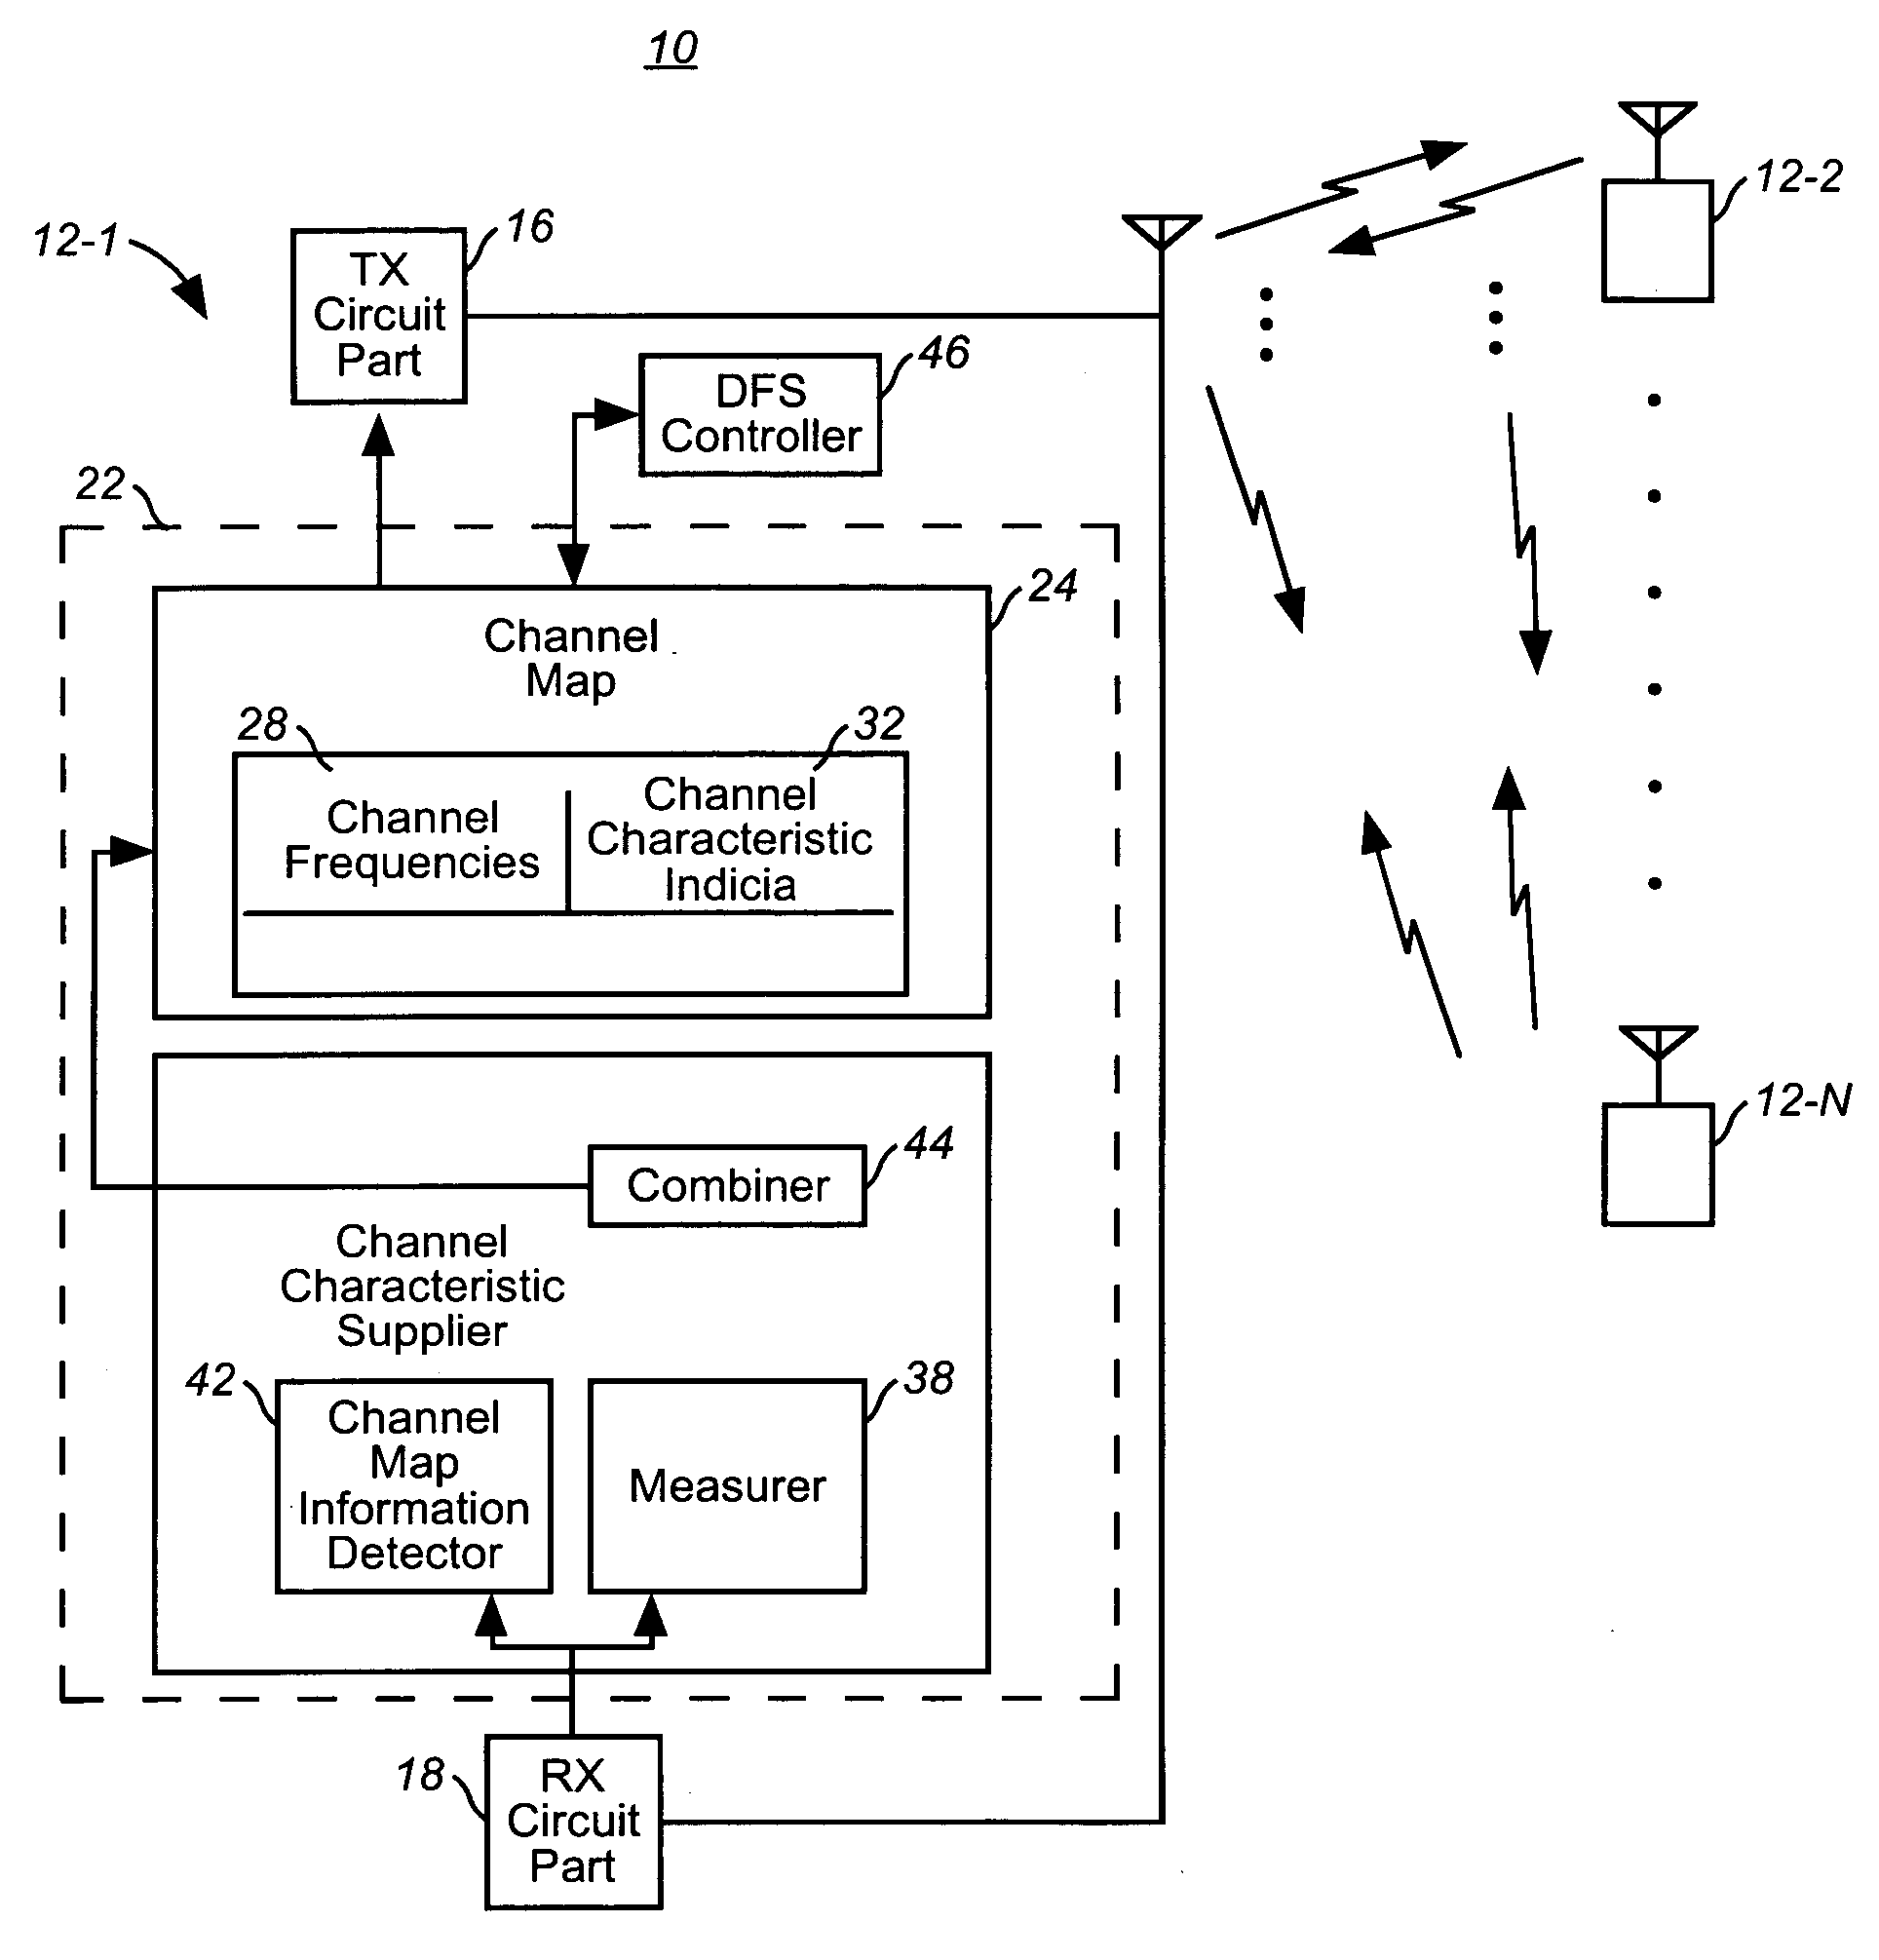 Assembly, and associated method, for facilitating channel frequecy selection in a communication system utilizing a dynamic frequency selection scheme